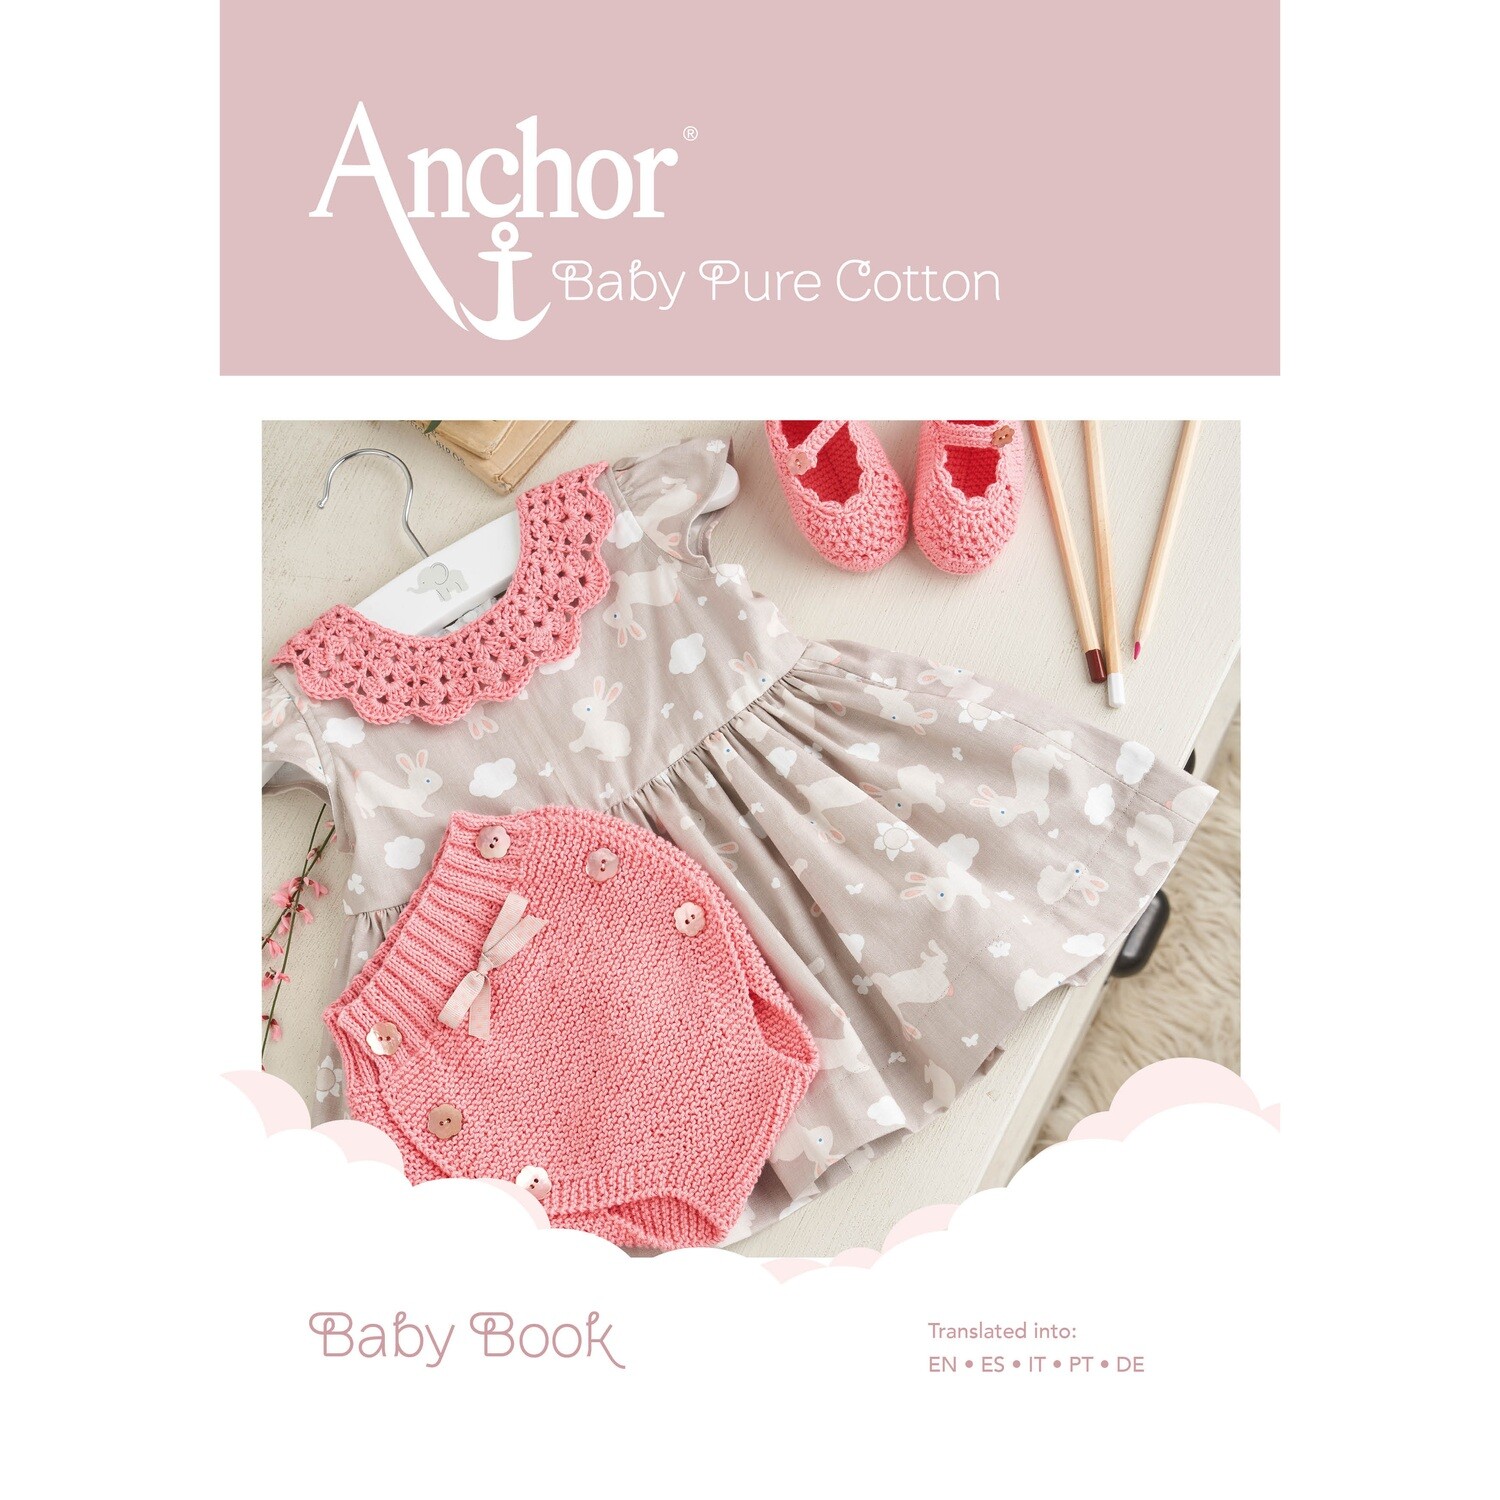 Baby Book featuring Anchor Baby Pure Cotton